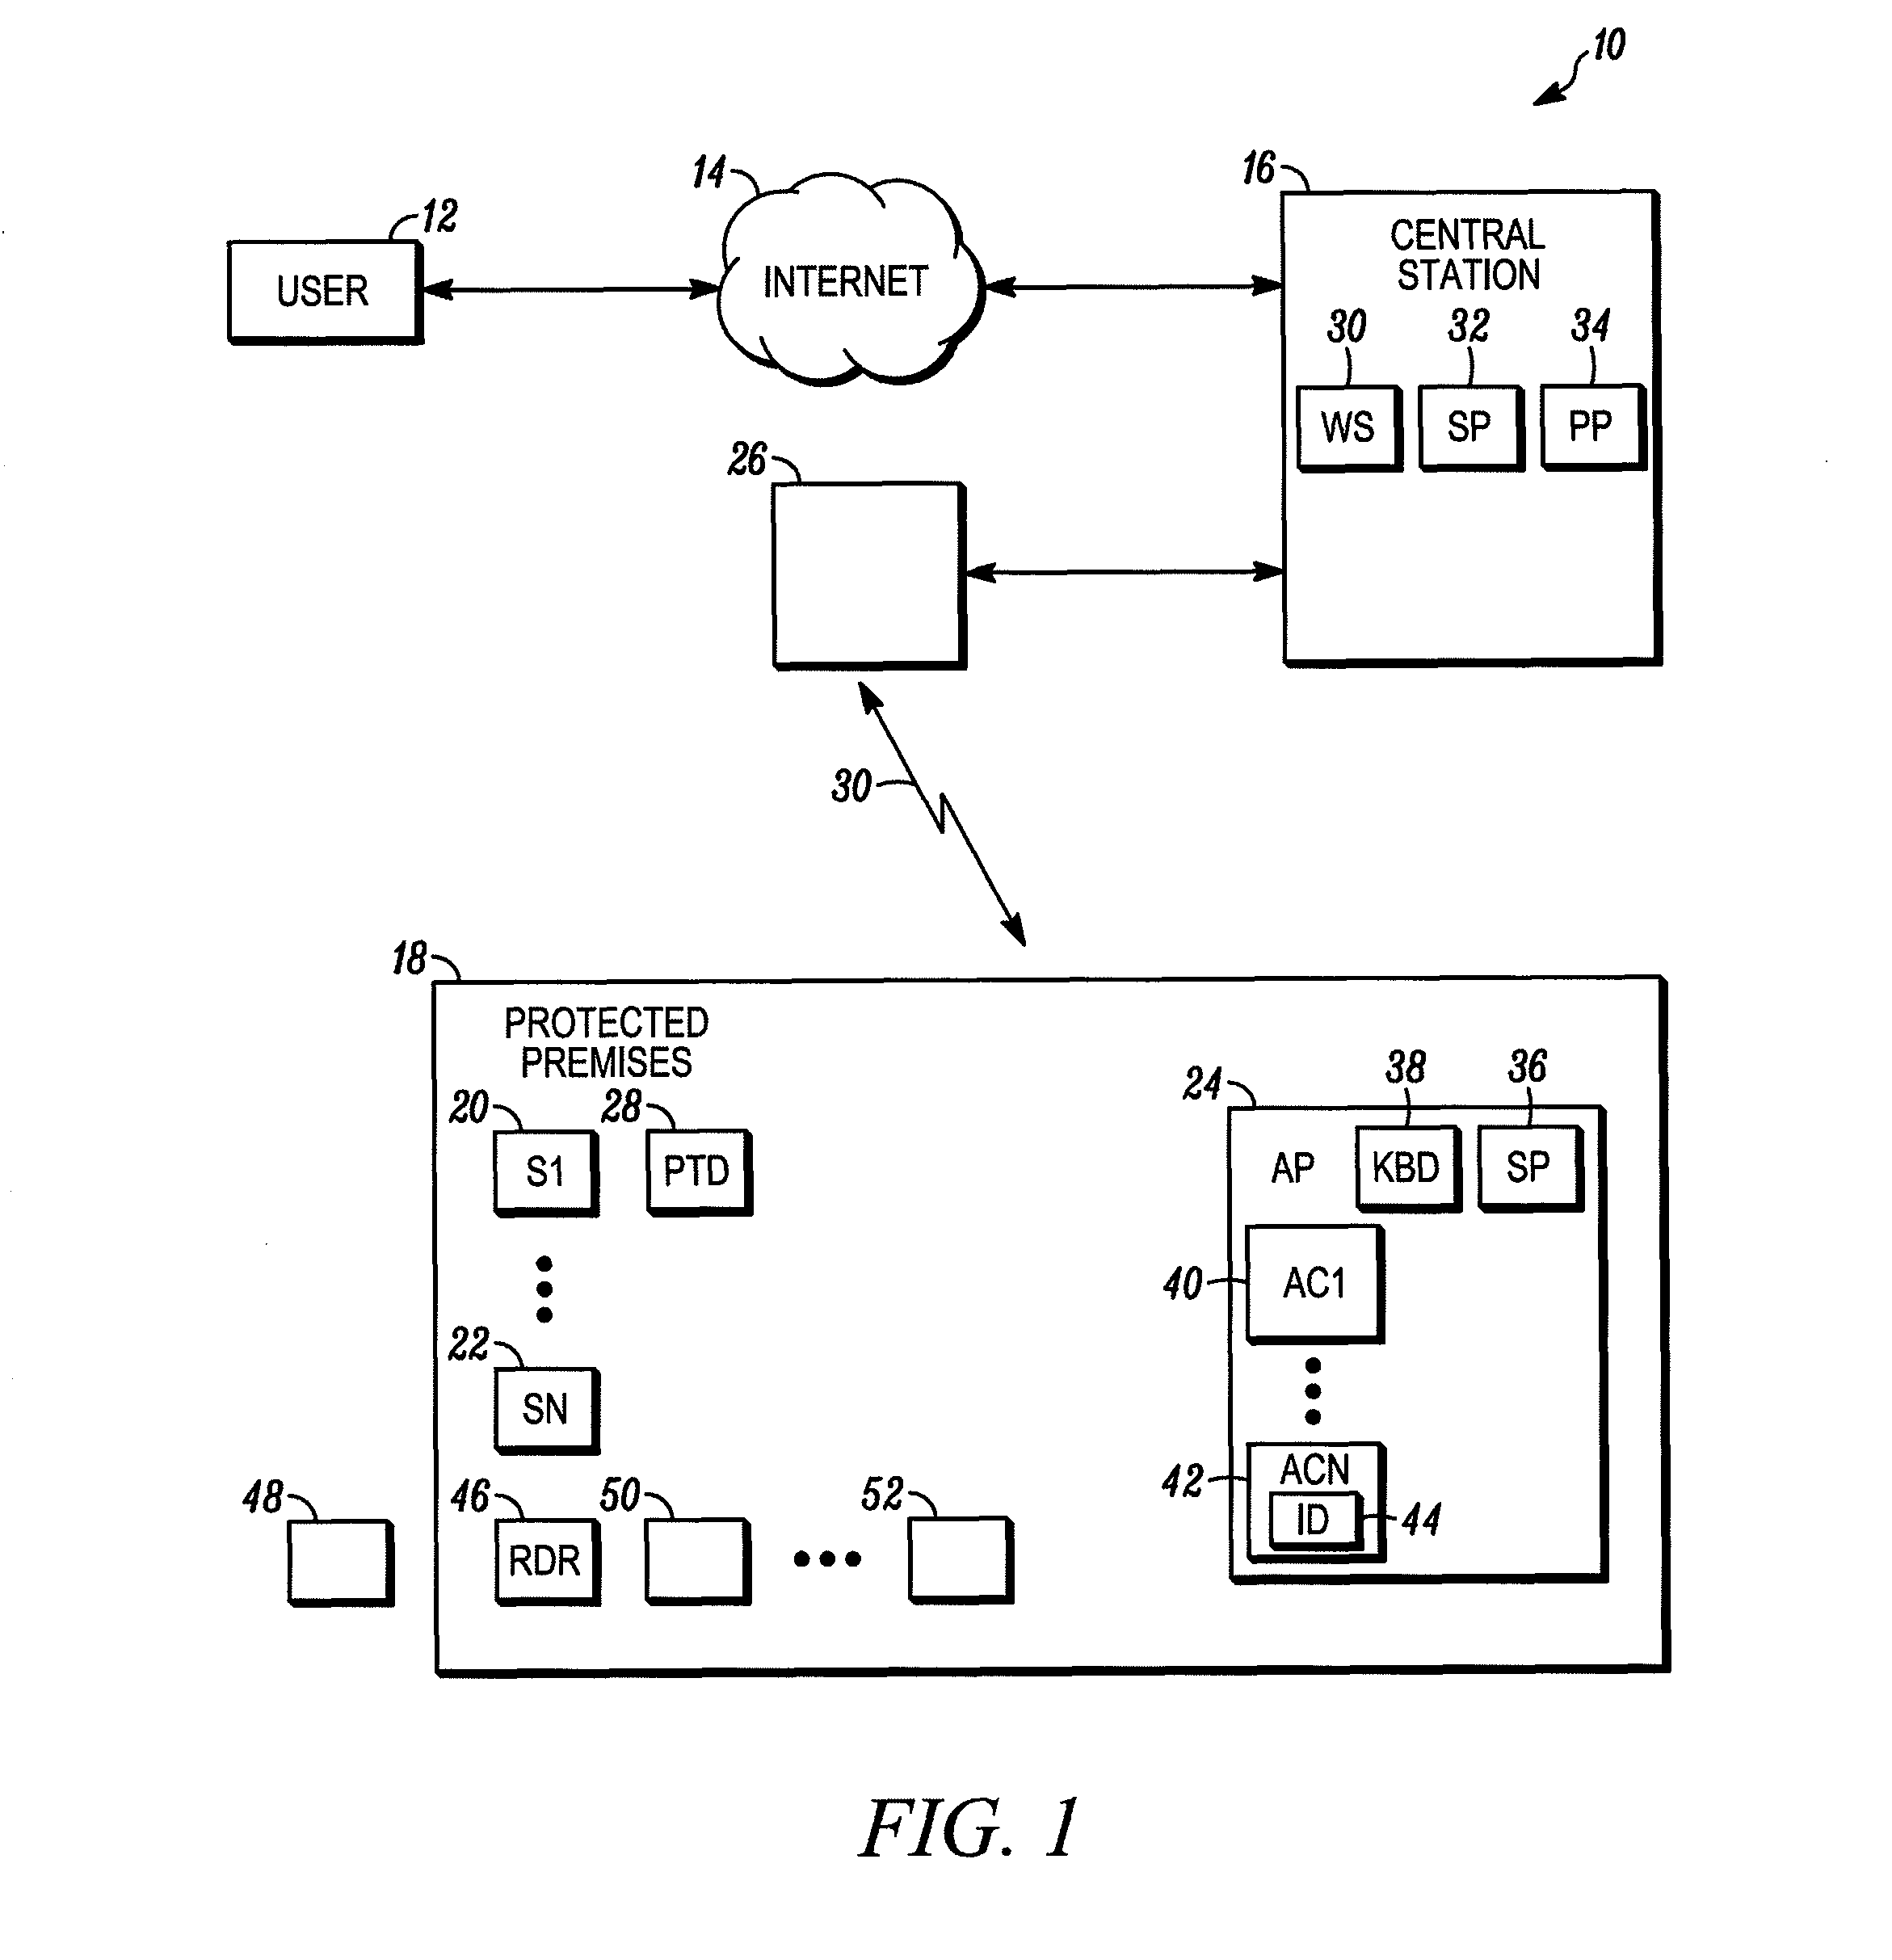 Method and apparatus for interrogation of a security system